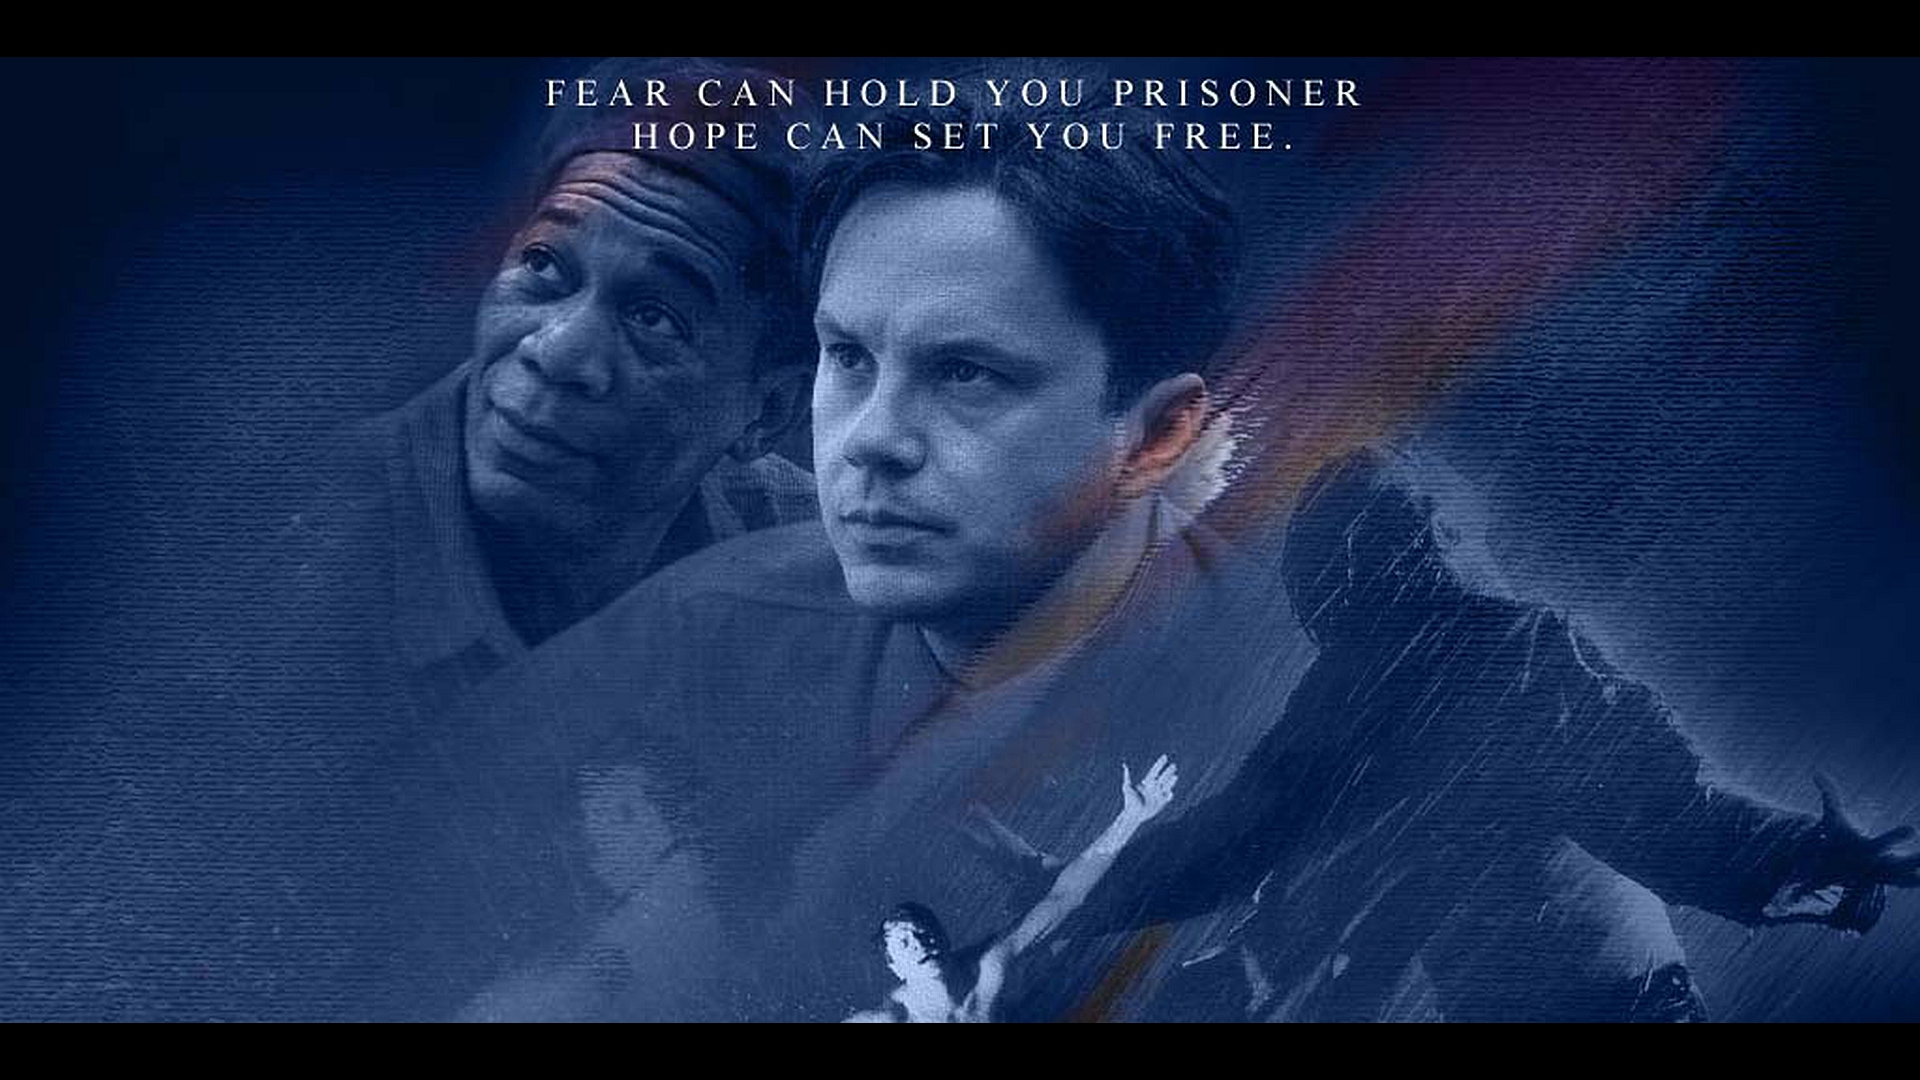 Explore More Wallpapers in the The Shawshank Redemption Subcategory!